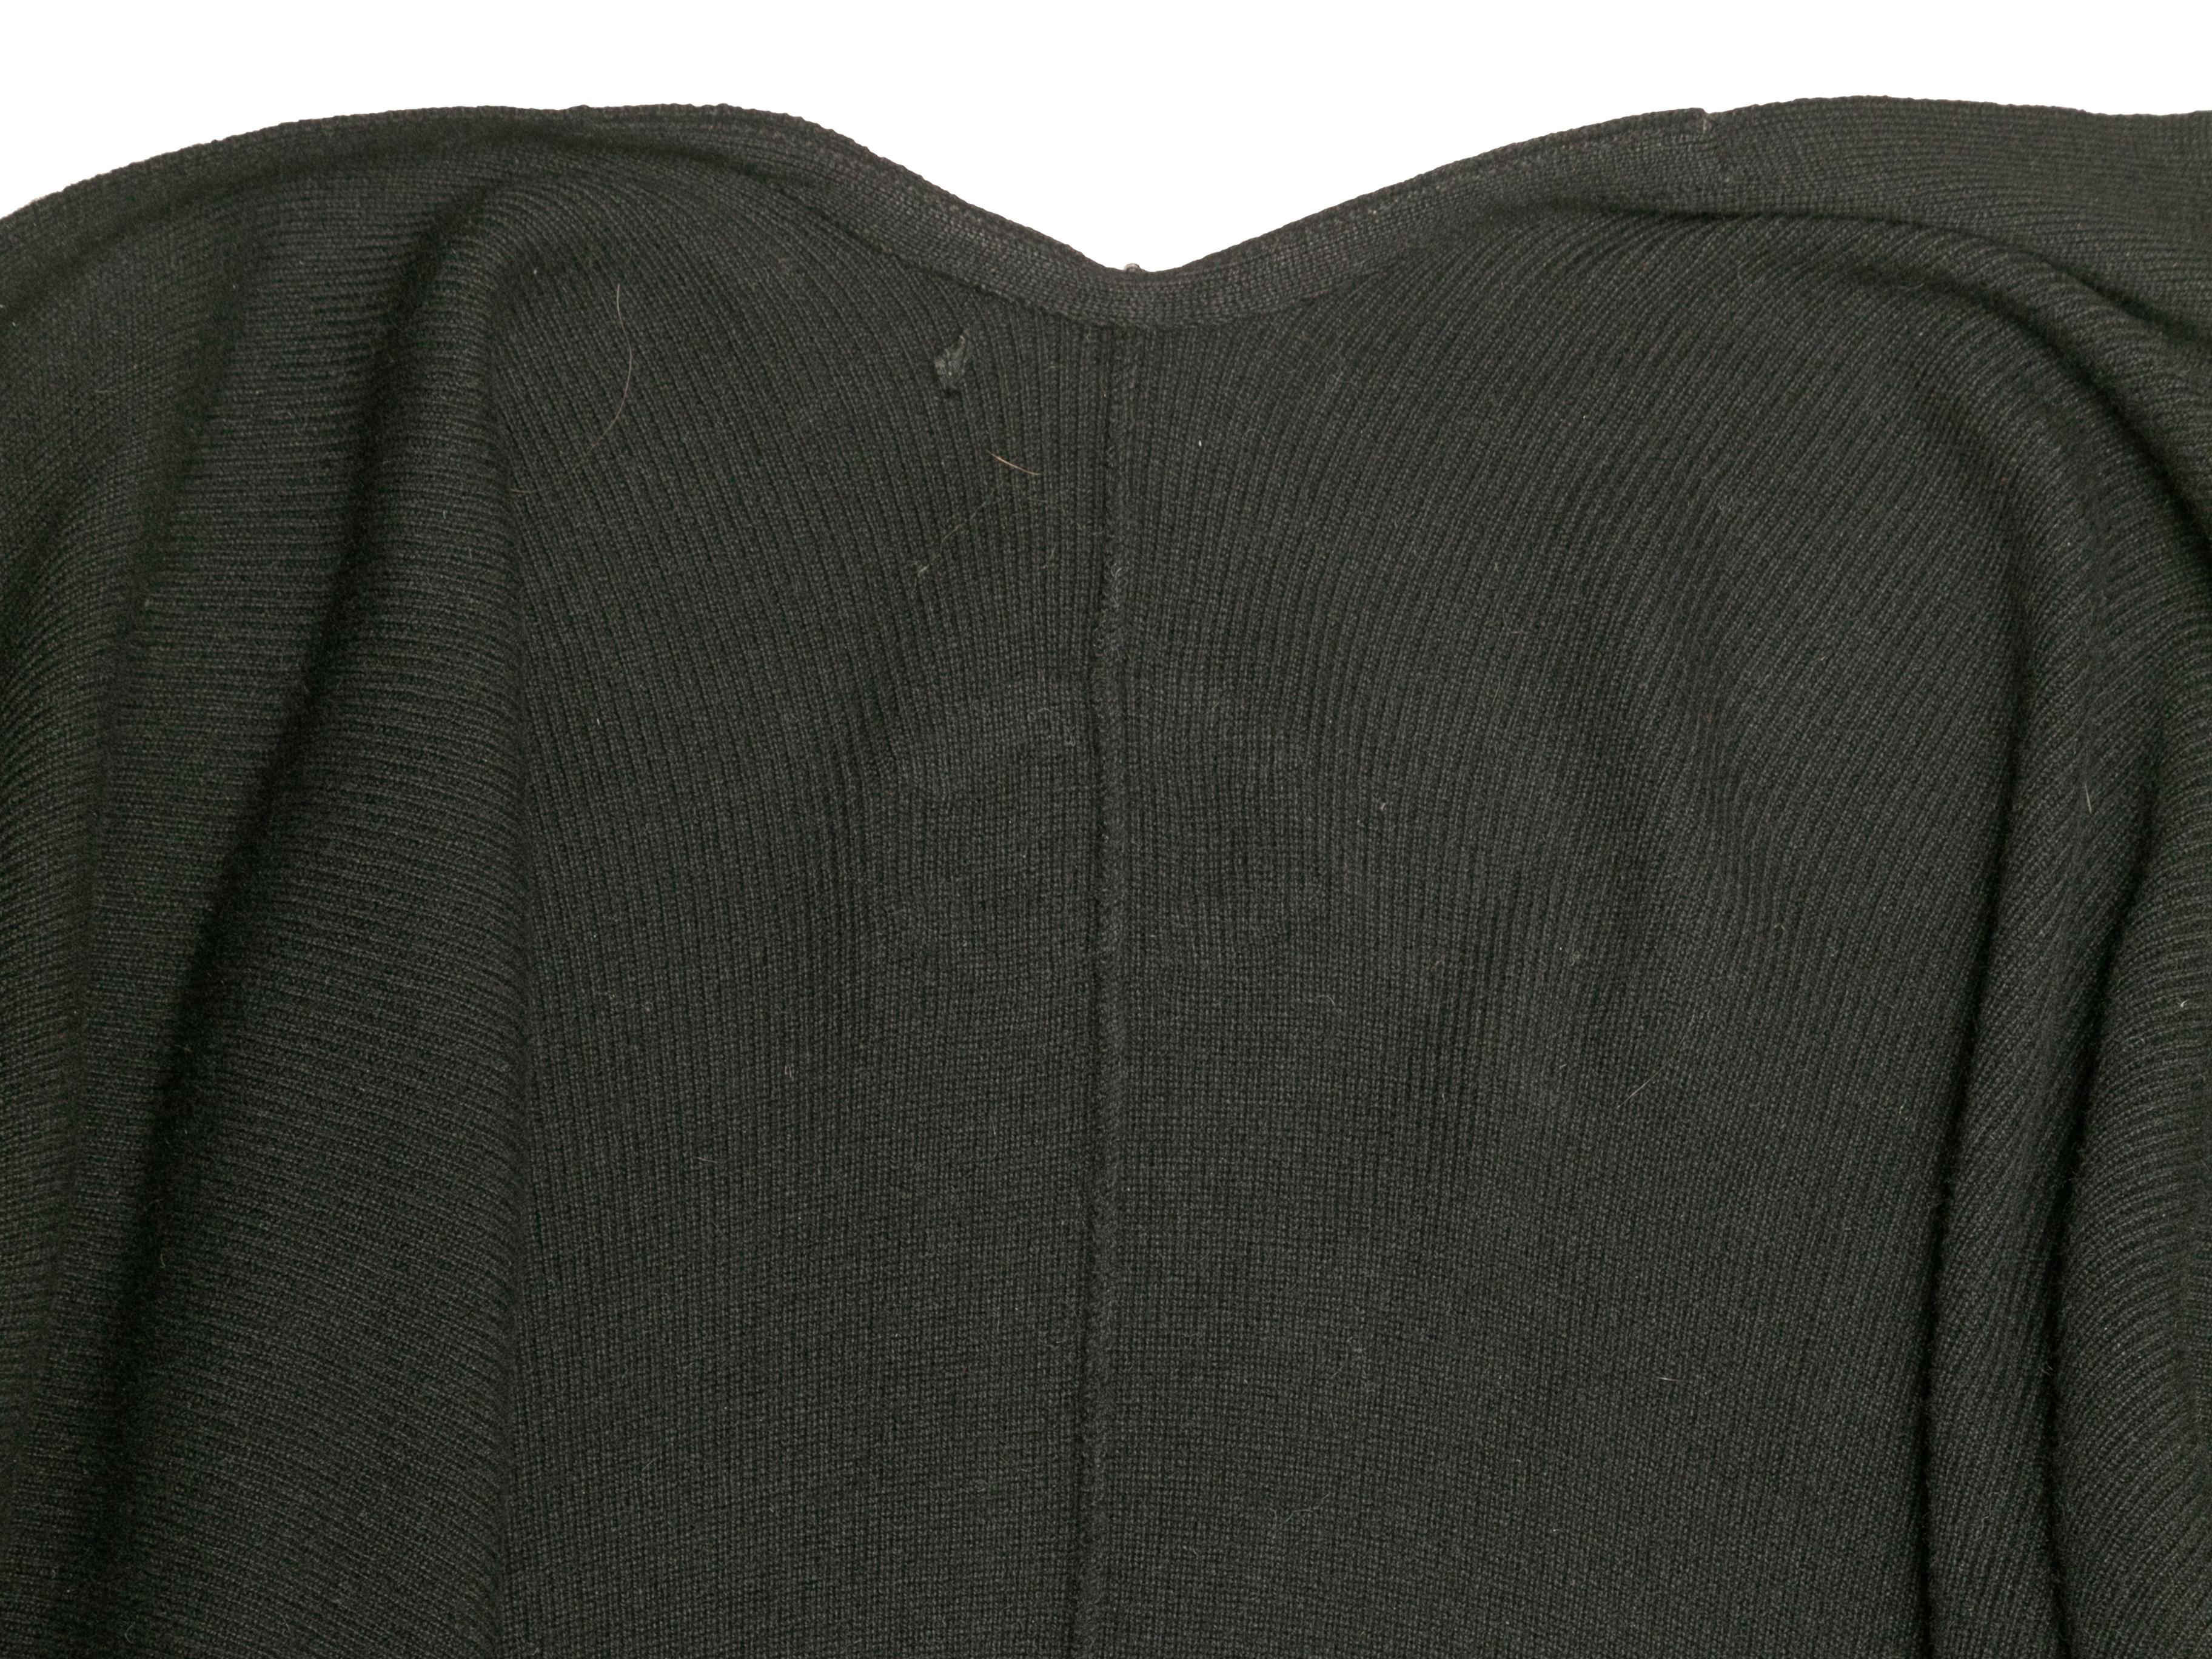 Women's or Men's Black Chanel Wool Shawl Cape Size O/S For Sale